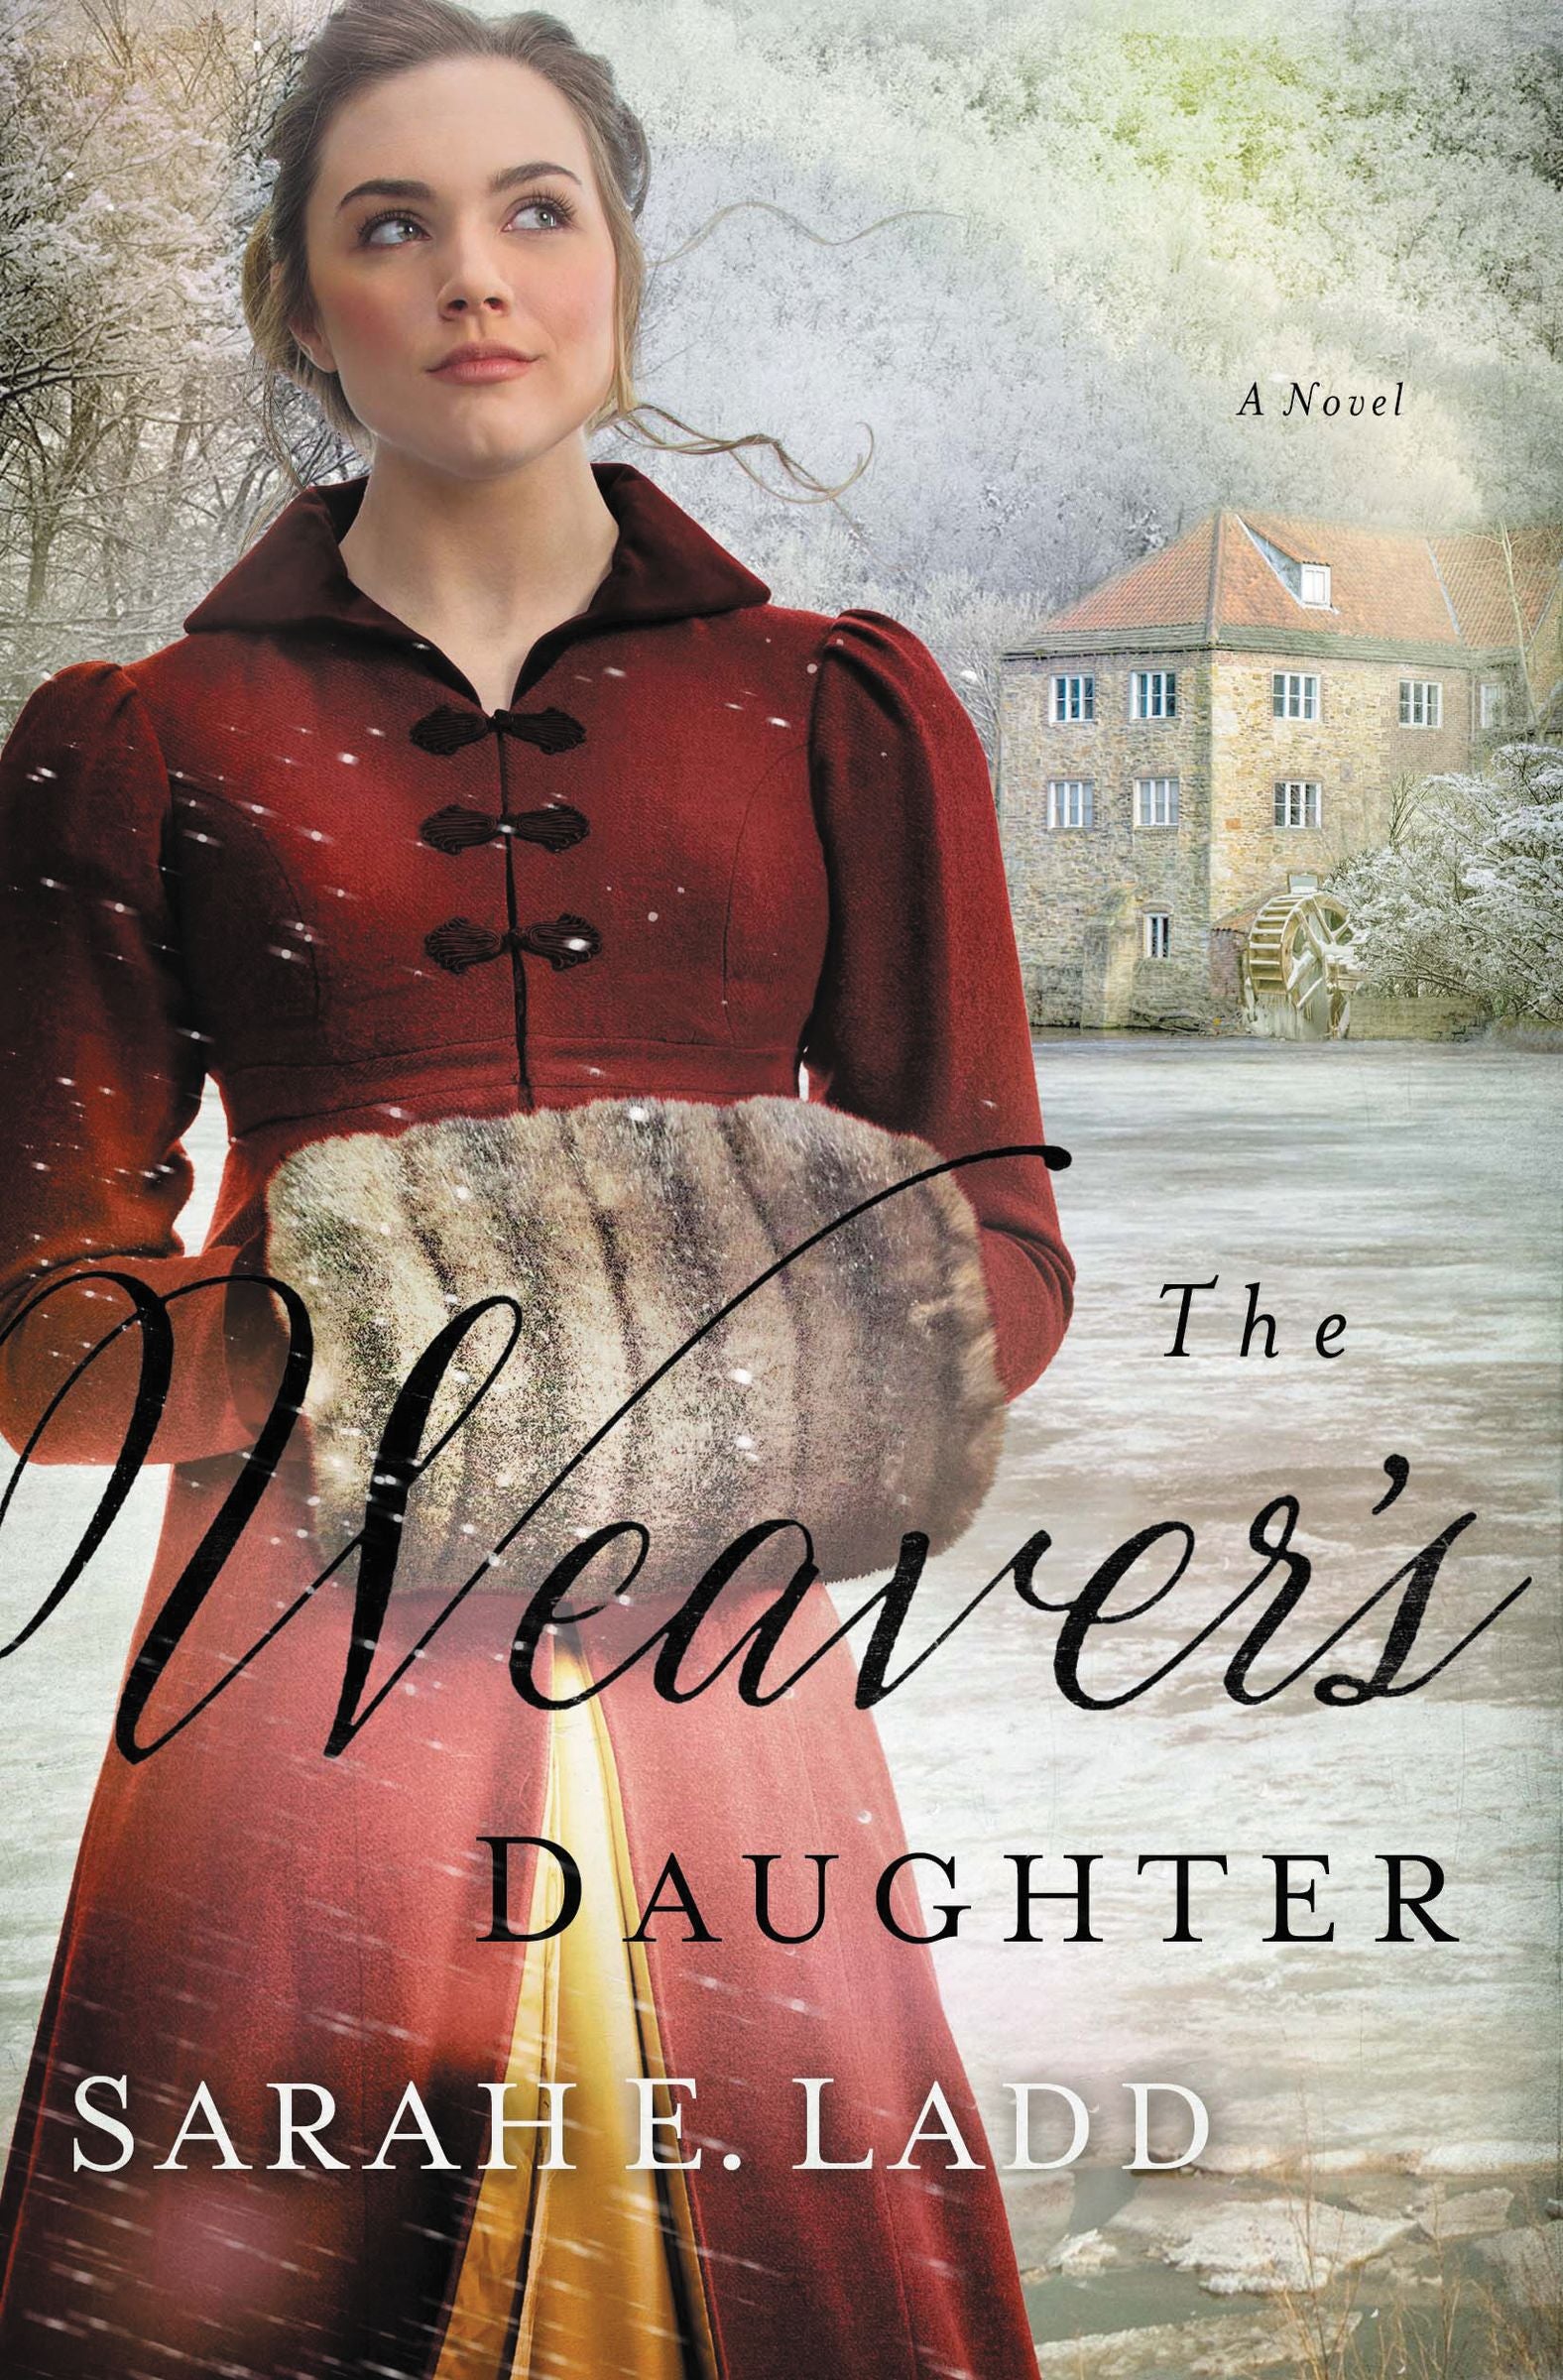 Image of The Weaver's Daughter other